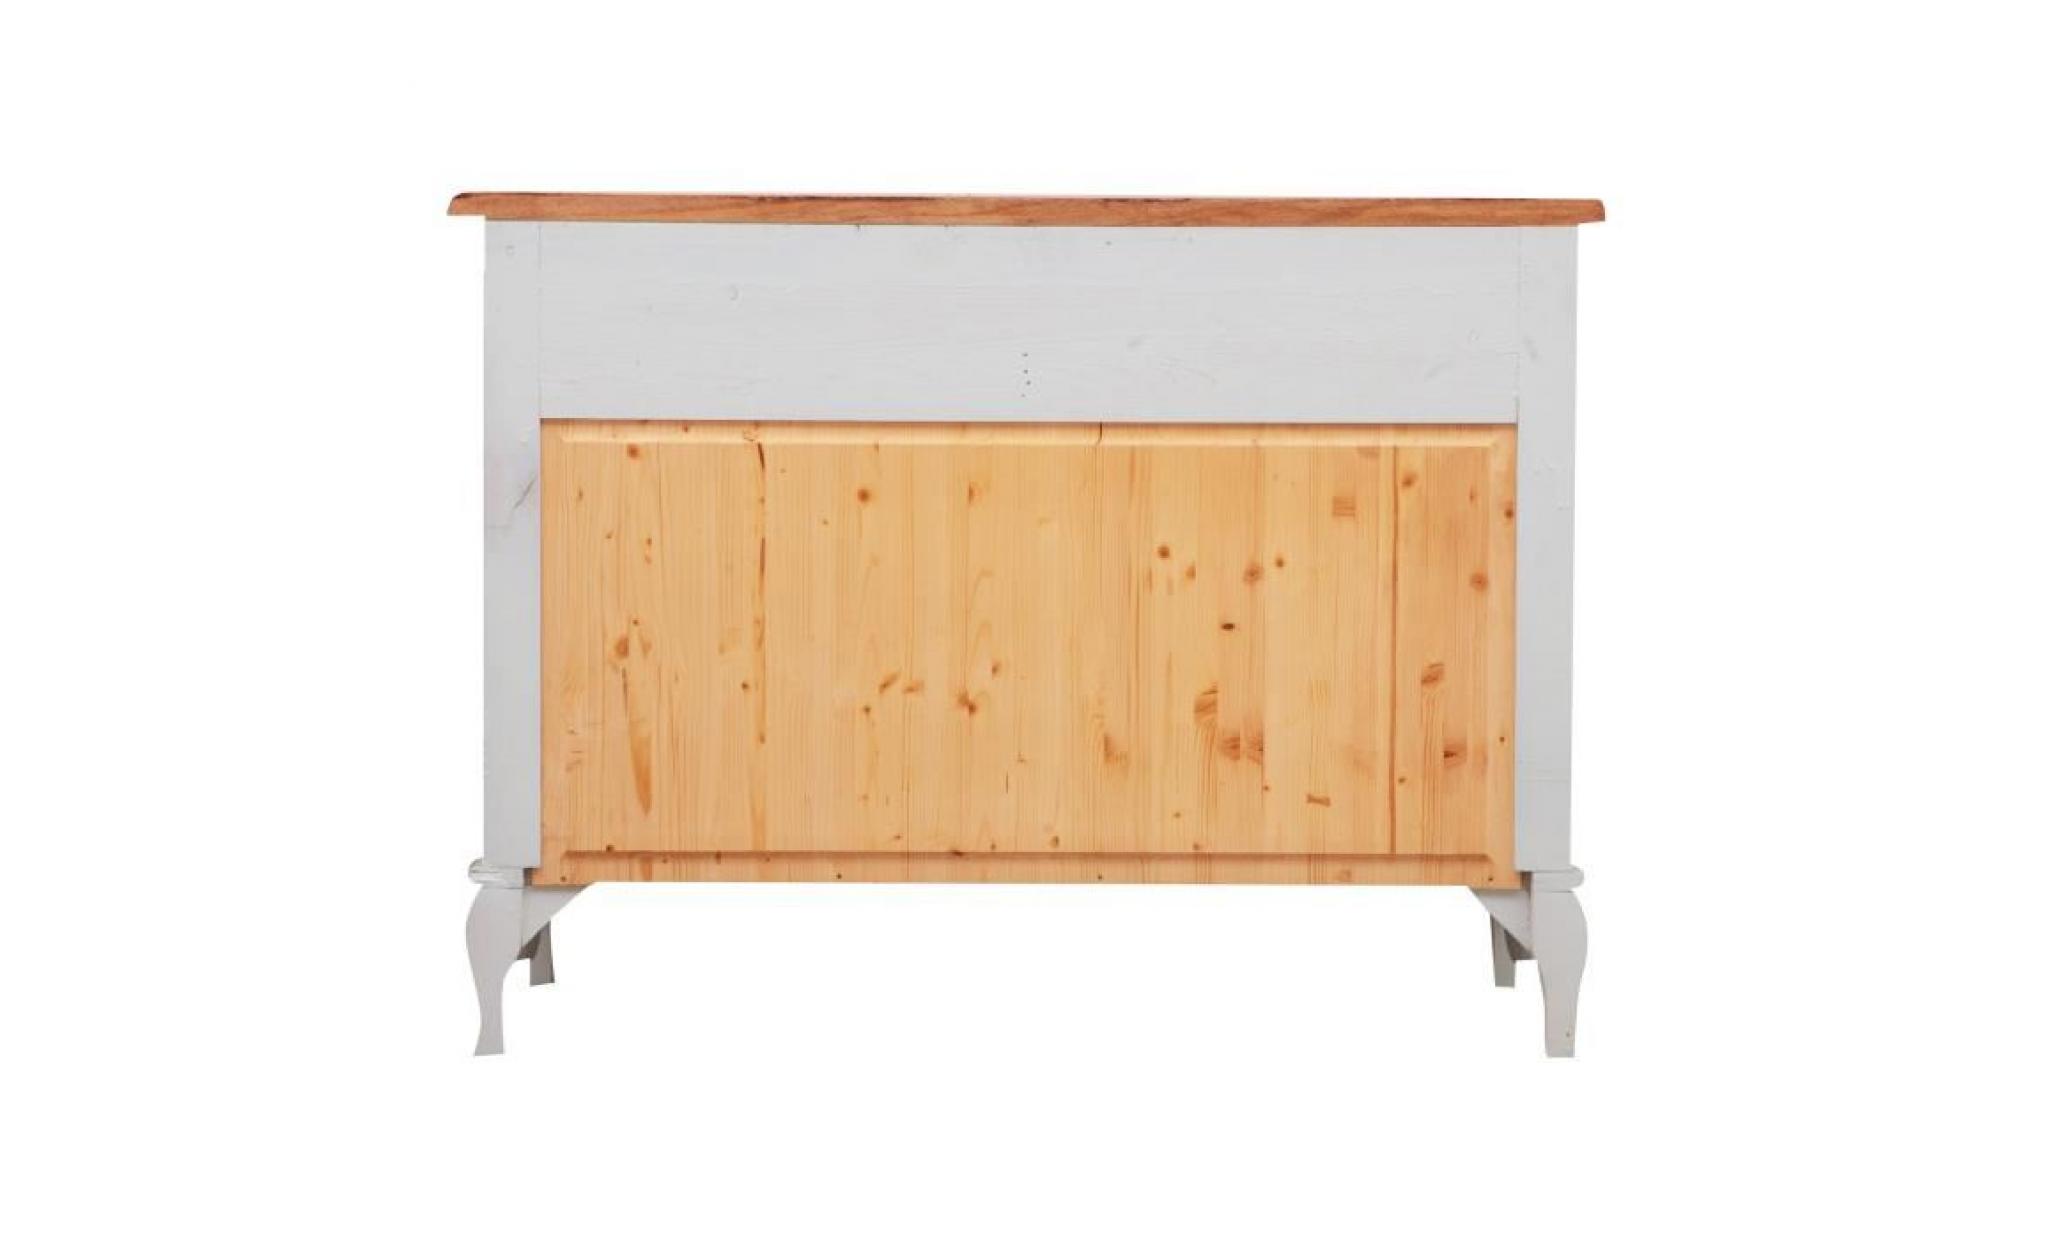 commode country in bois massif di tilleul structure blanche ancienne piano finiture noix 107x47x80 c pas cher